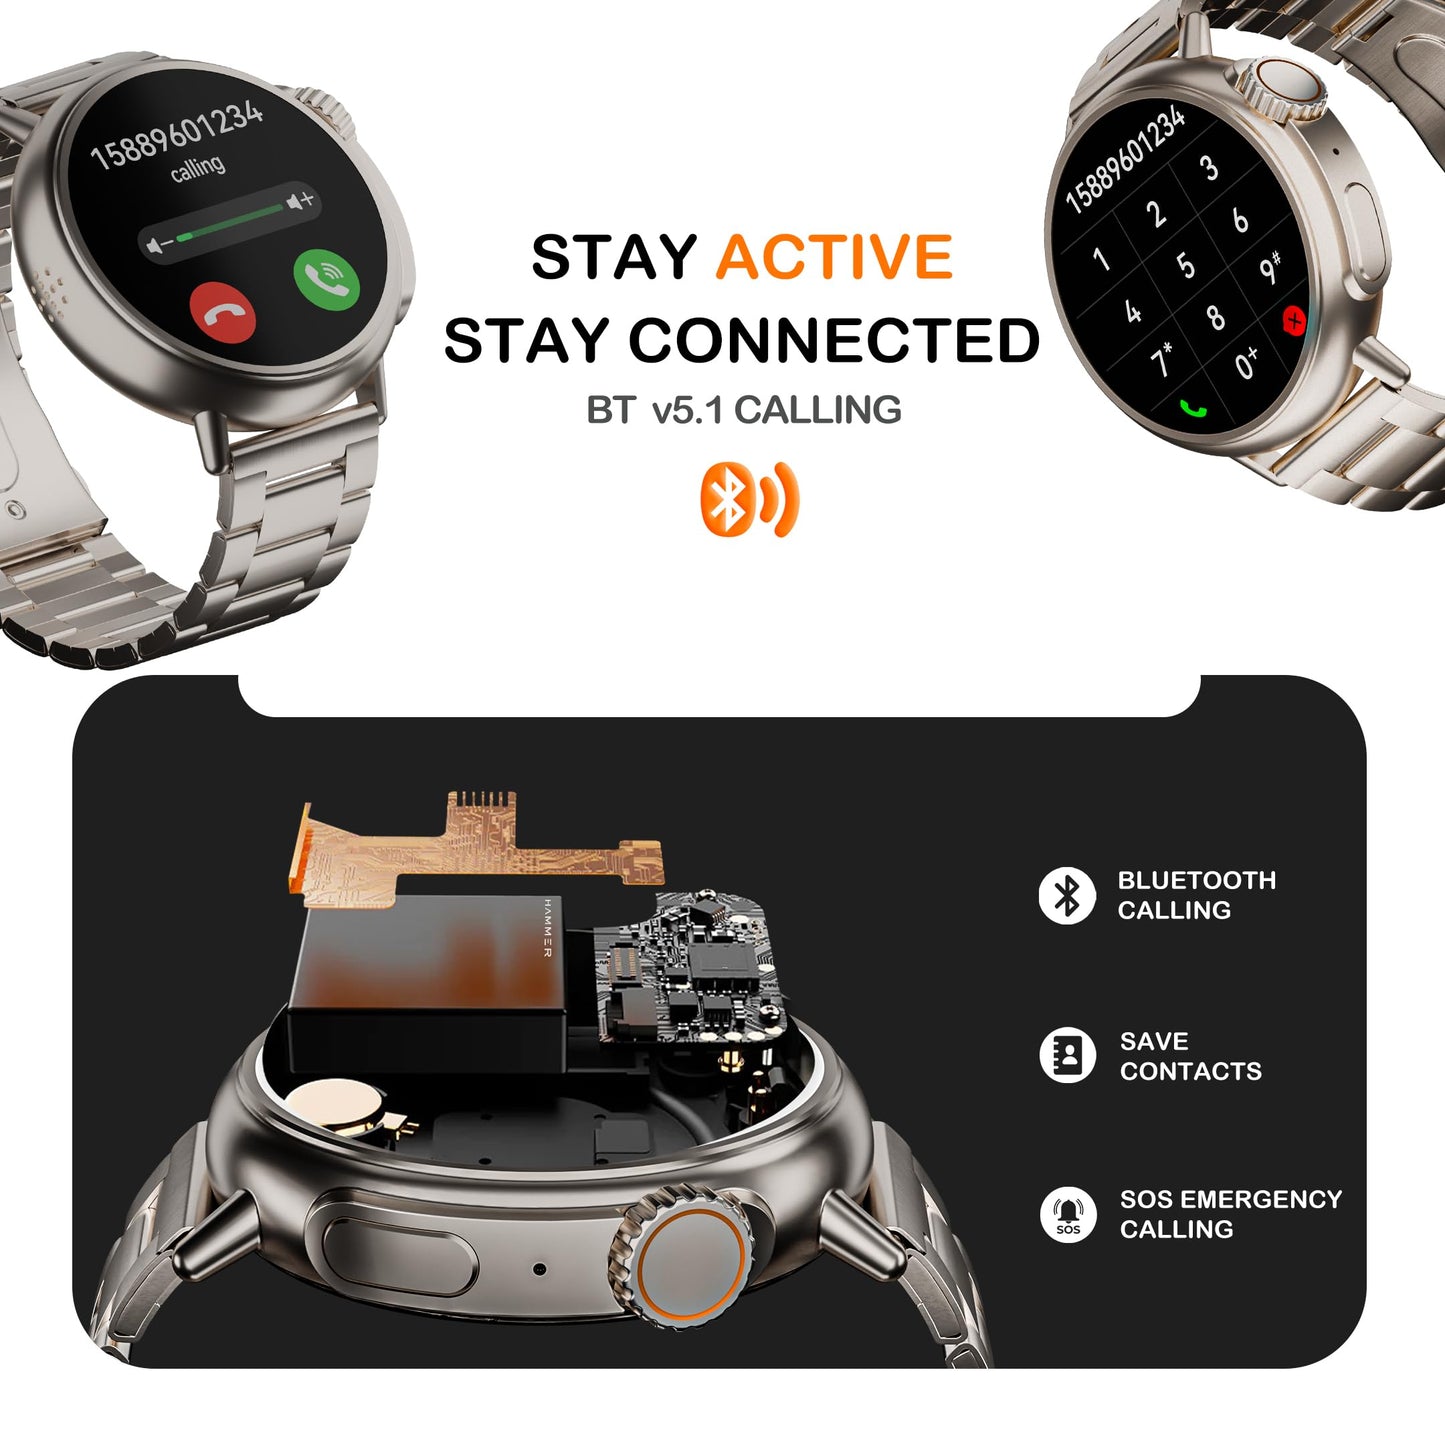 HAMMER Active 3.0 1.39" Display BT Calling Smart Watch with Metal Strap, Always On Display, Health Tracking, AI Voice Assistant (Metallic Silver)